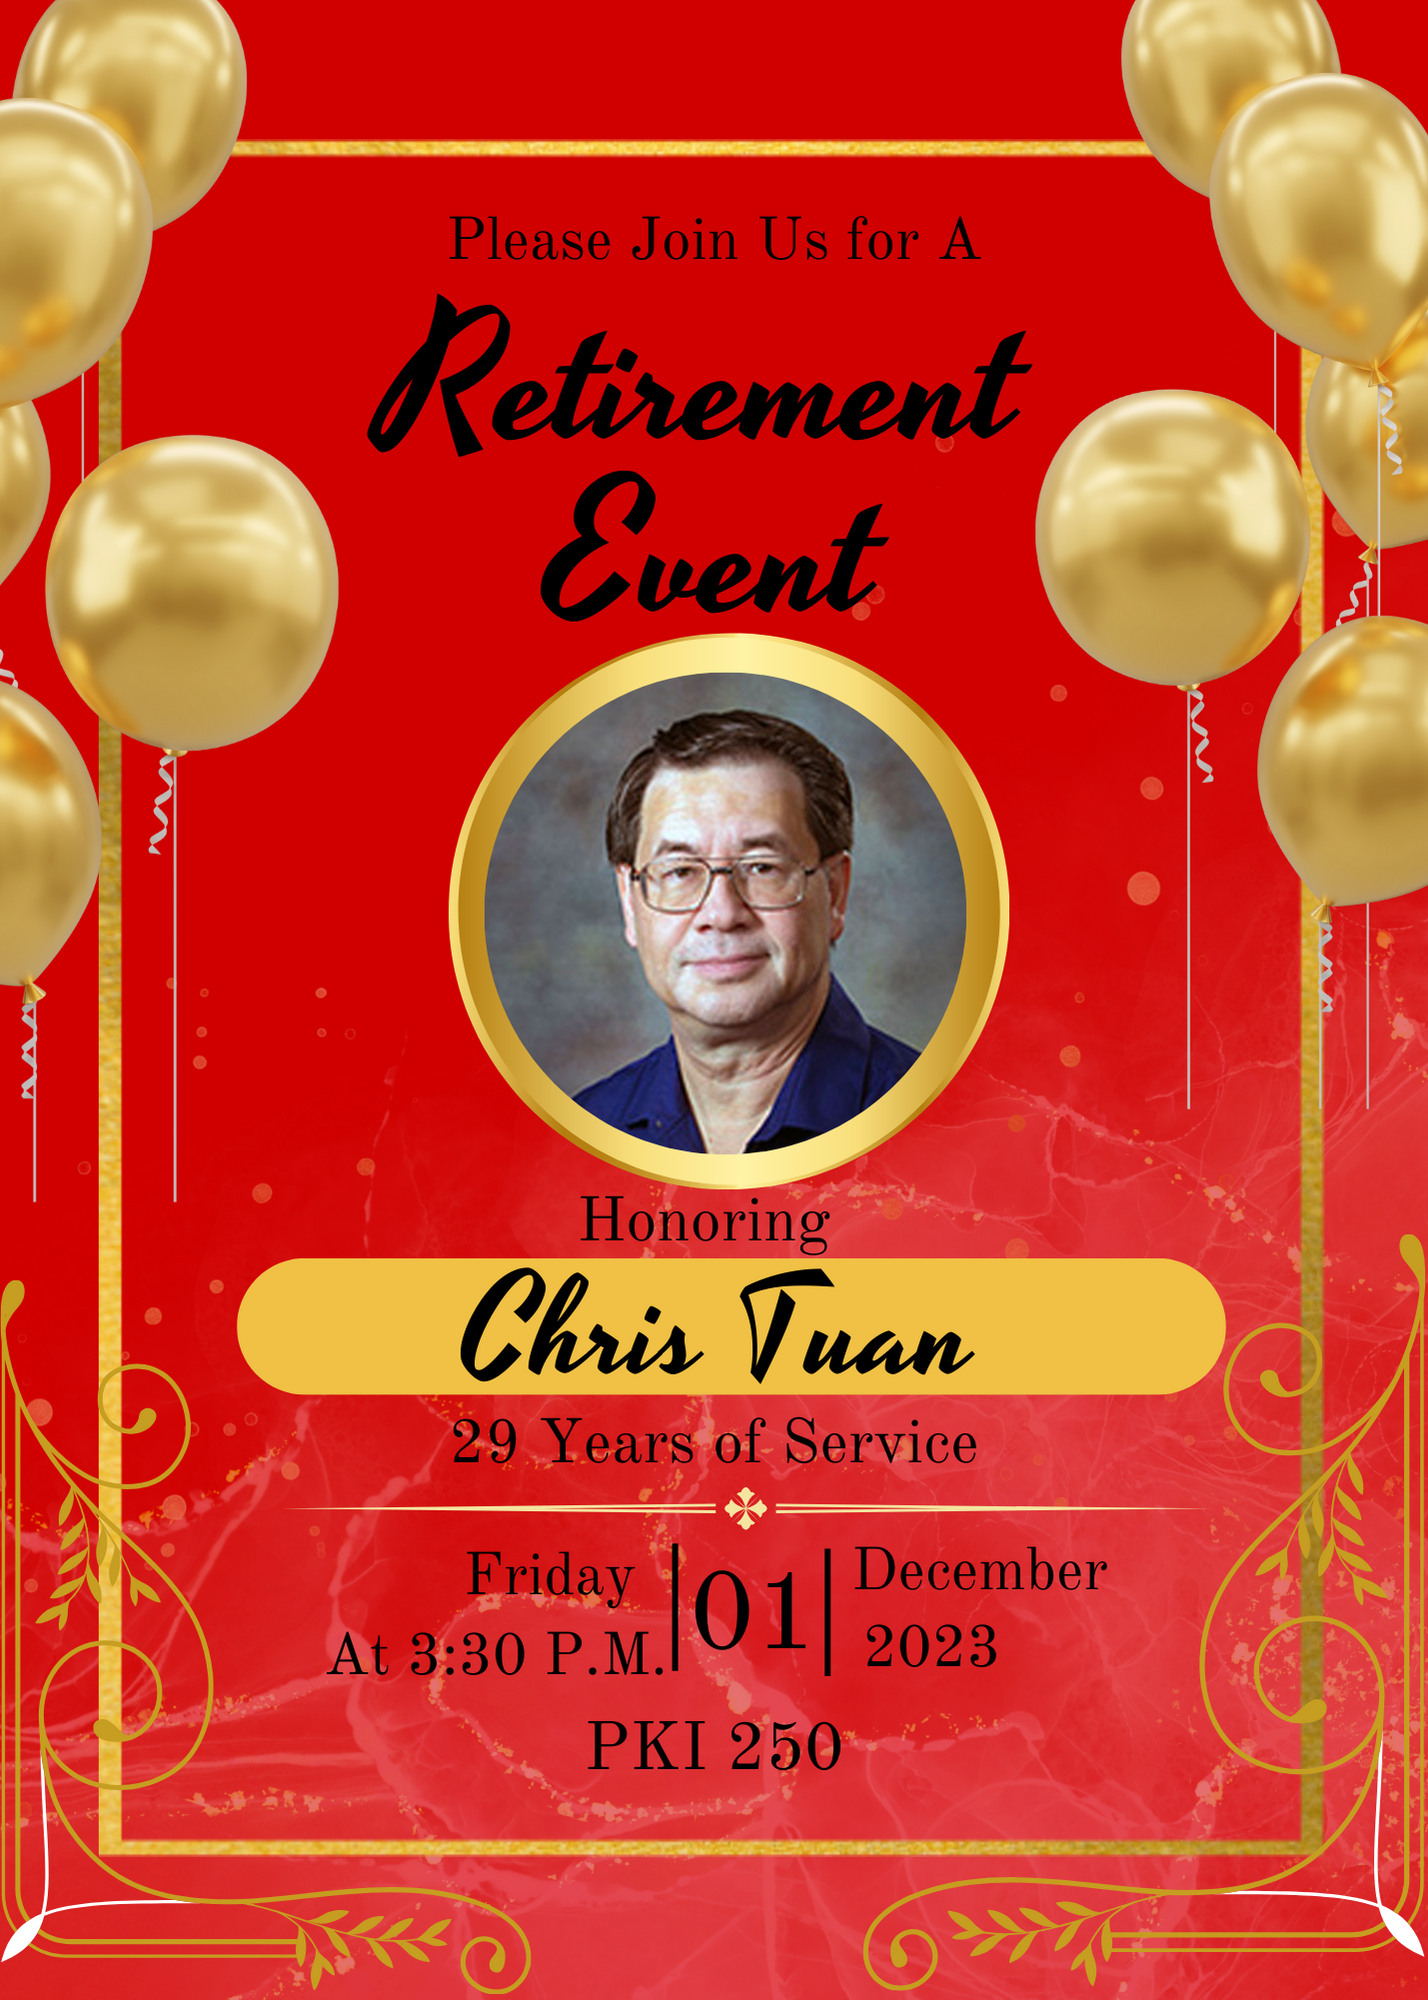 A retirement event for Chris Tuan, professor of civil and environmental engineering, is scheduled for 3:30 p.m., Friday, Dec. 1 in PKI 250.